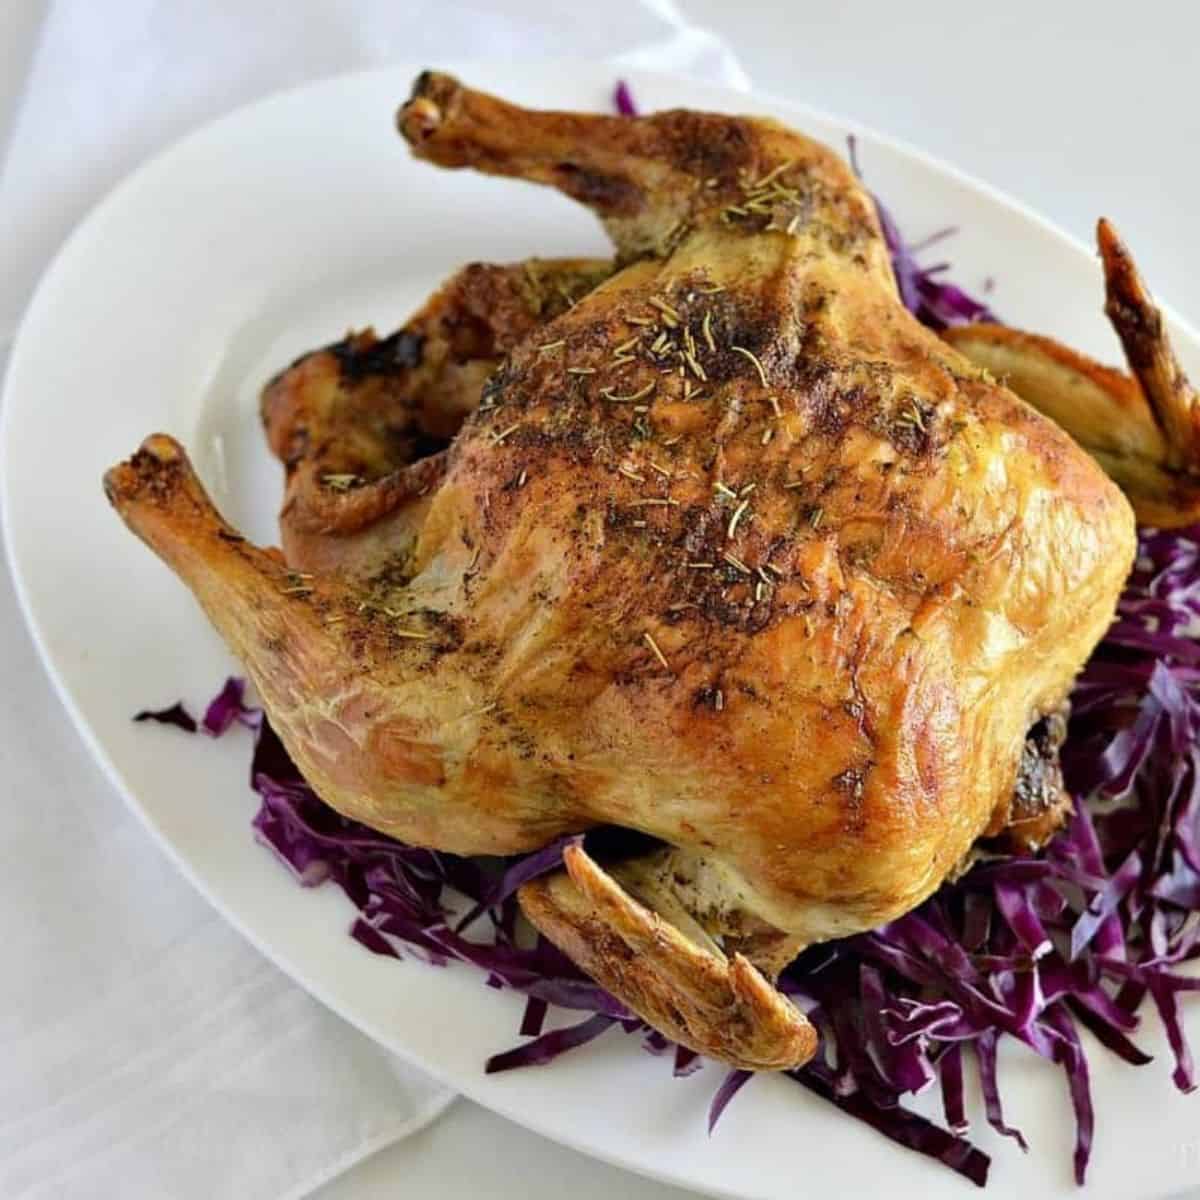 https://www.thisvivaciouslife.com/wp-content/uploads/2017/12/Dutch-Oven-Whole-Chicken-square.jpg